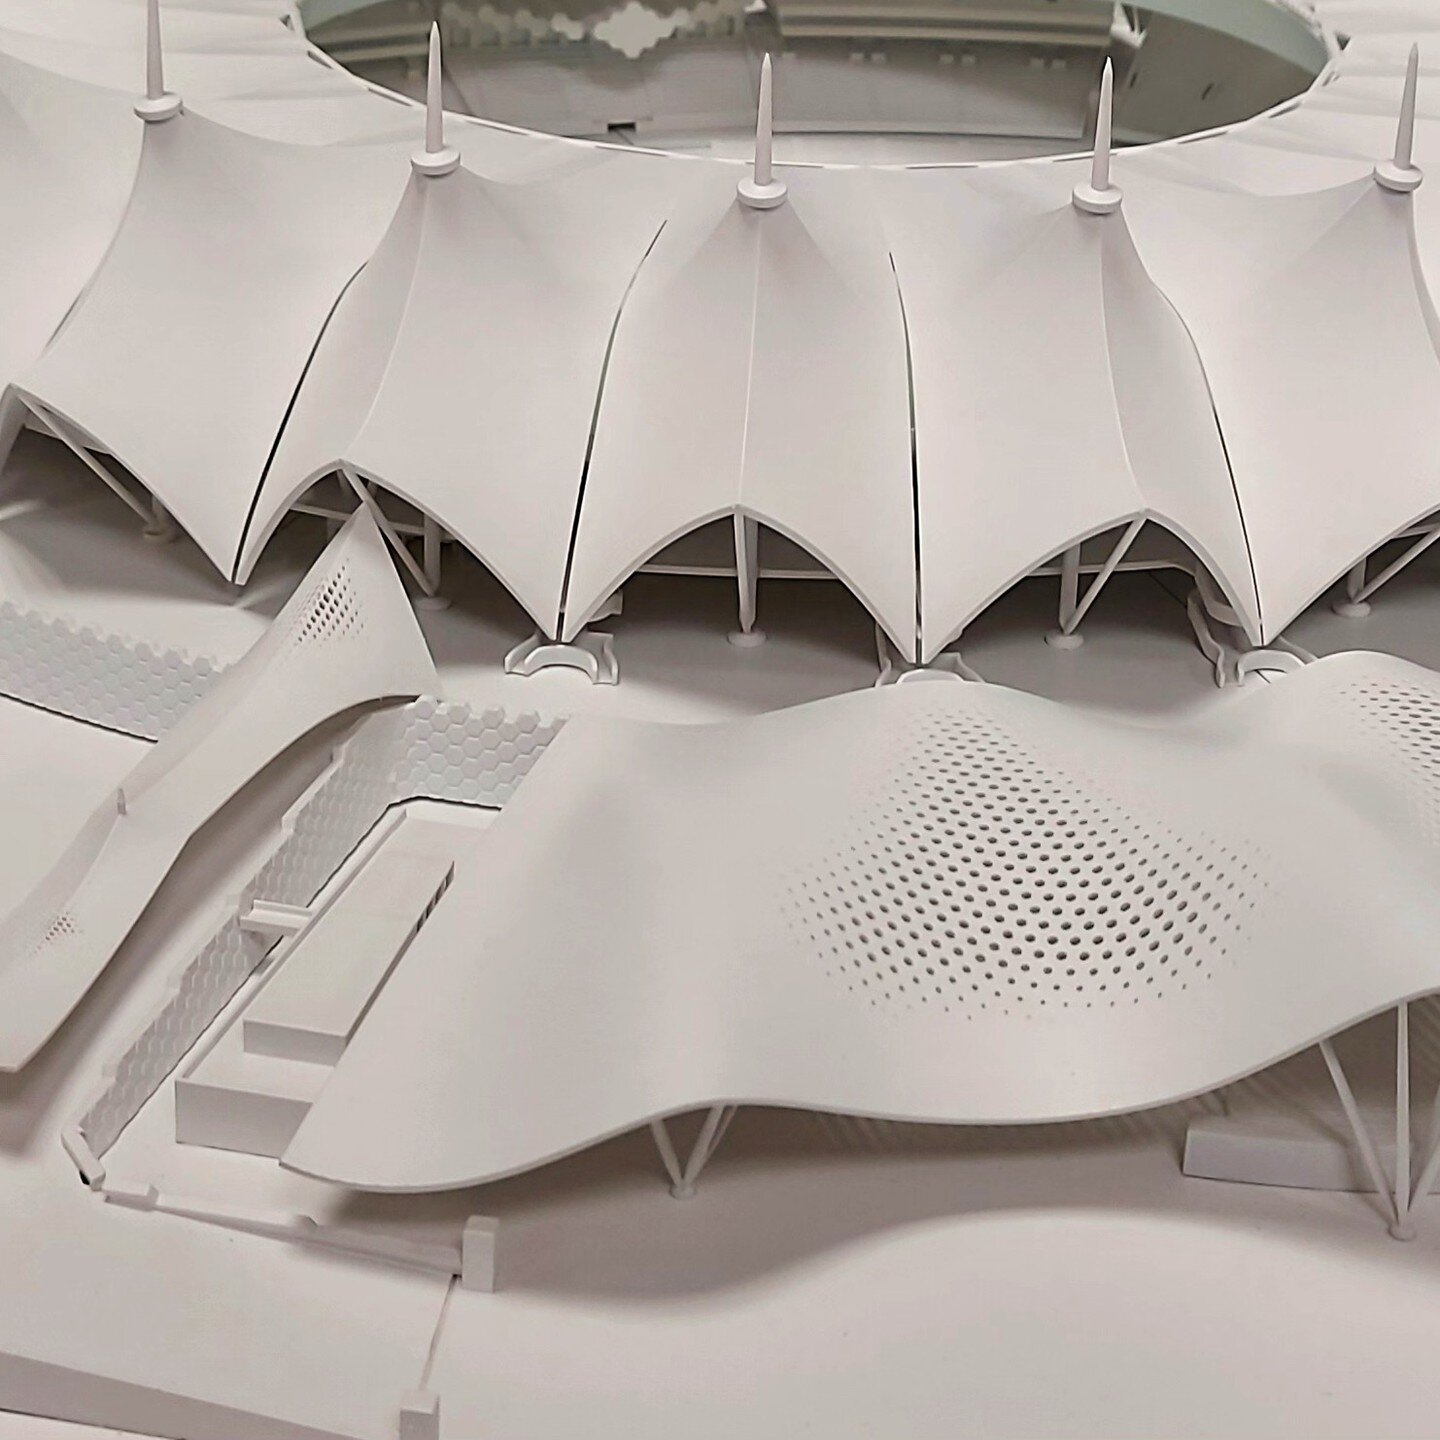 This would usually be a more time consuming #architectural model due to the complex curves and detail but with the help of #3dprinting, we can produce this model faster. While the #3dprinter churns out the more intricate difficult parts, the #modelma